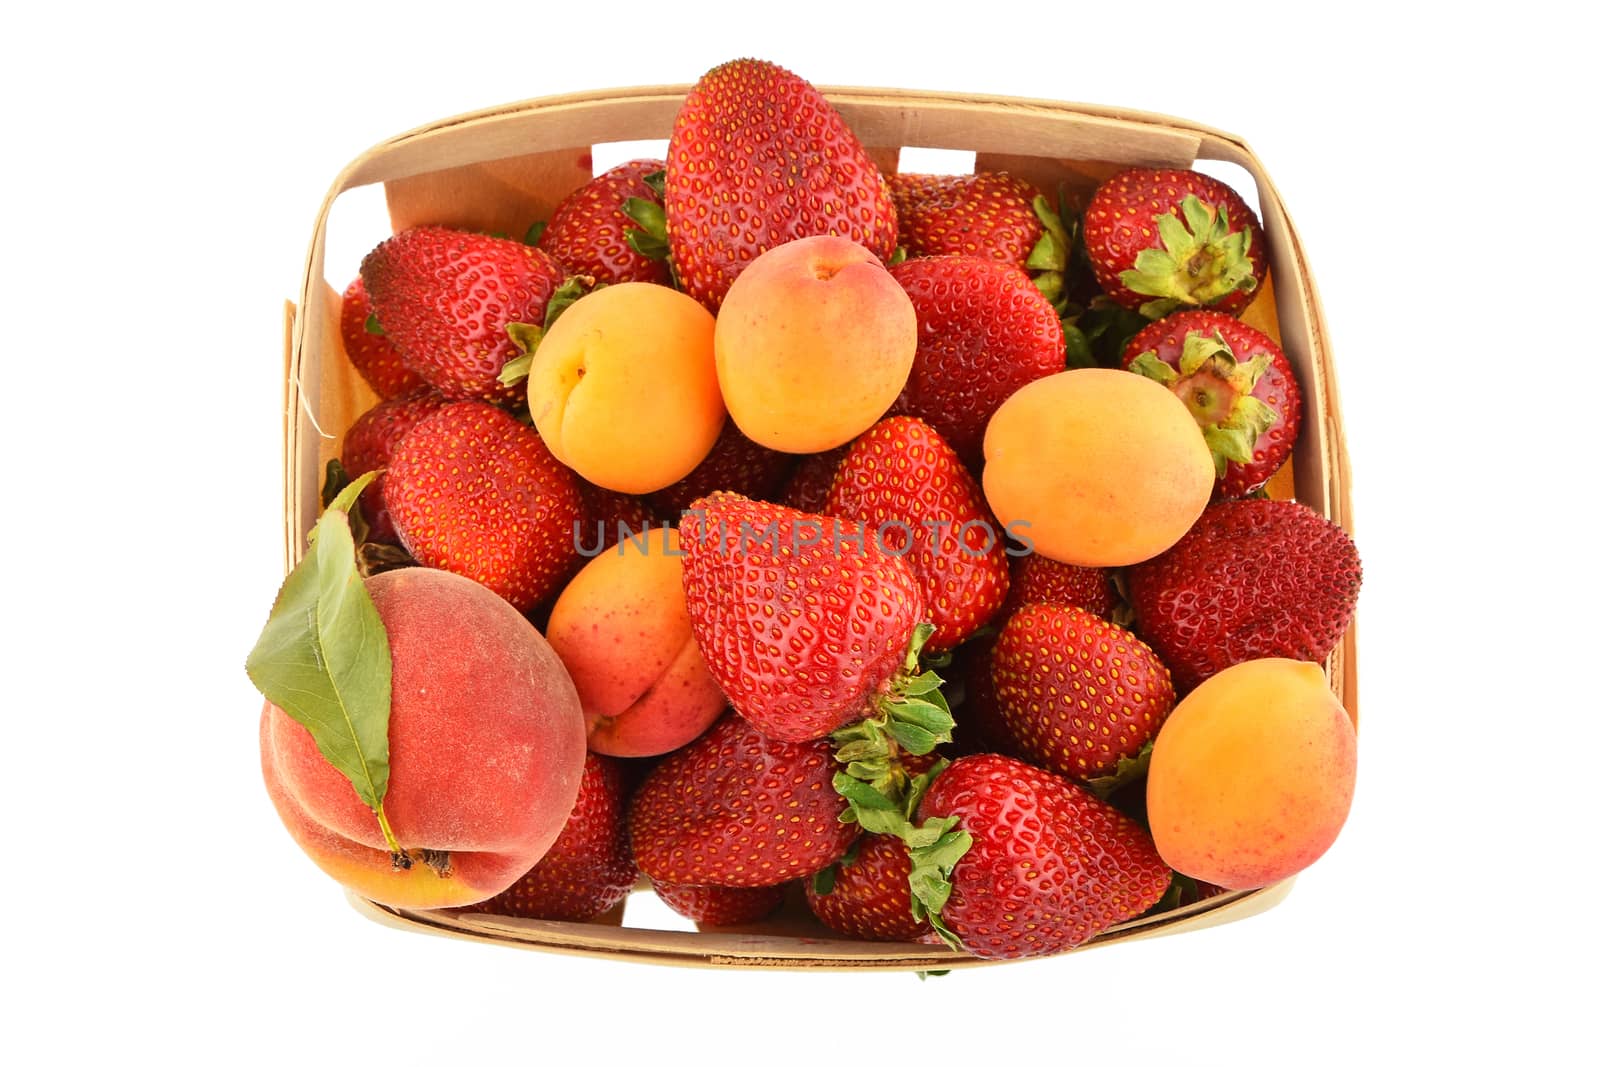 Strawberries, apricots and peach in wooden basket isolated on wh by BreakingTheWalls